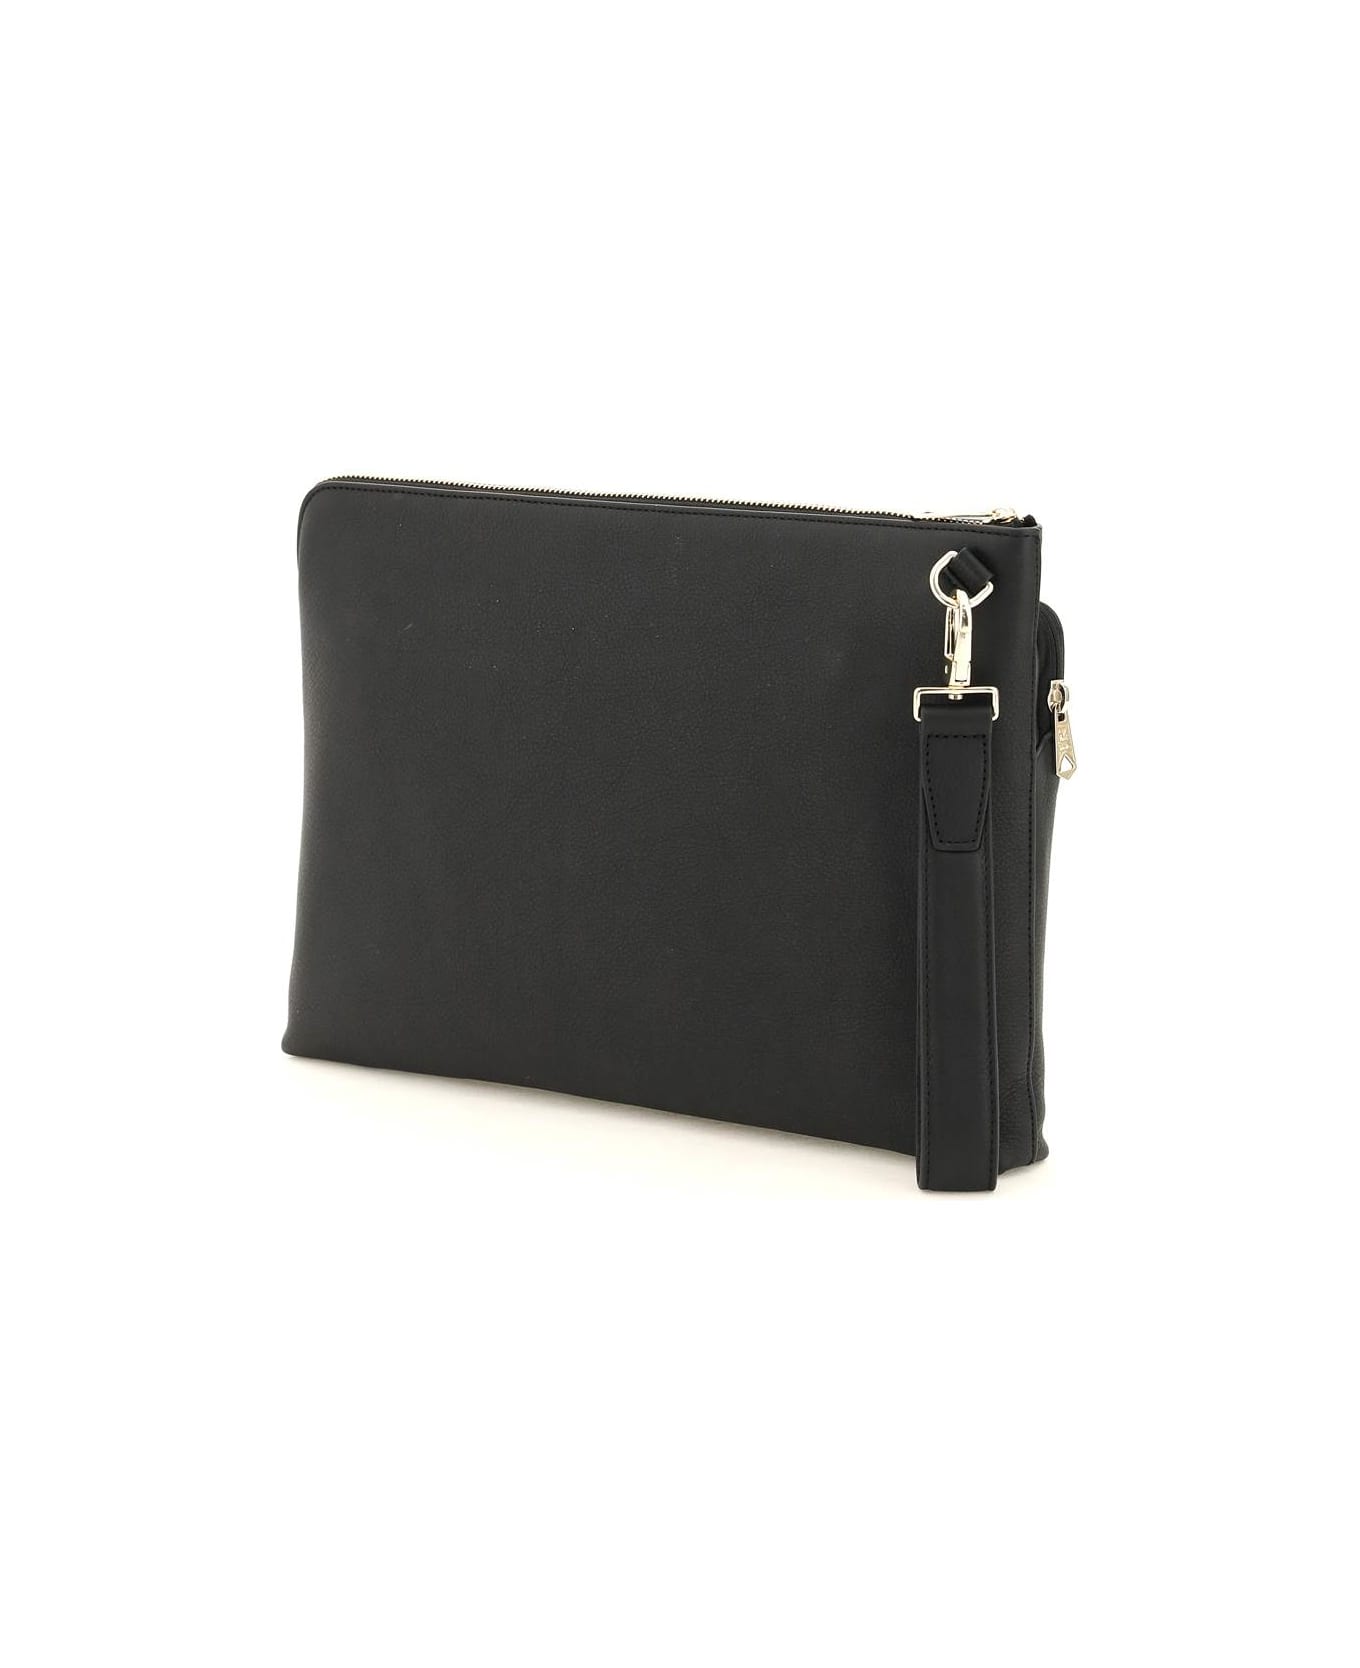 Paul Smith Leather Document Case Luggage - BLACK トラベルバッグ